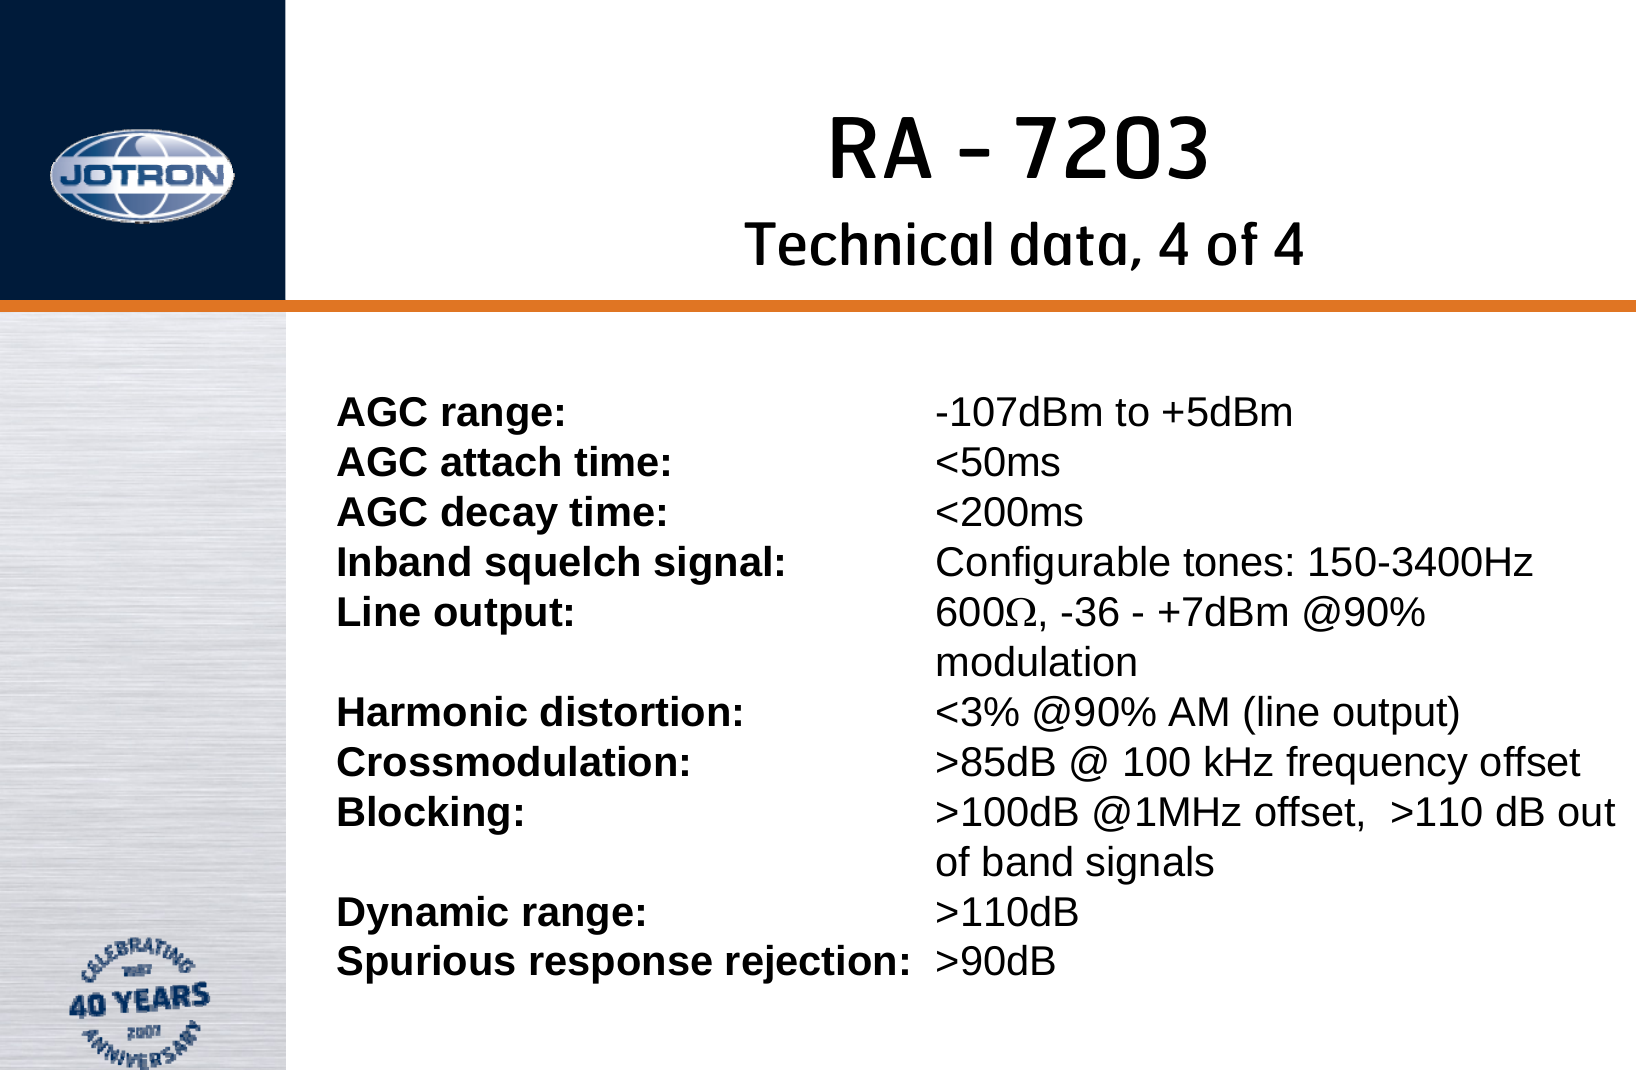 RA - 7203Technical data, 4 of 4AGC range: -107dBm to +5dBm                                  AGC attach time: &lt;50ms                                                      AGC decay time: &lt;200ms                                                    Inband squelch signal: Configurable tones: 150-3400Hz                   Line output: 600Ω, -36 - +7dBm @90% modulation                                                      Harmonic distortion: &lt;3% @90% AM (line output) Crossmodulation: &gt;85dB @ 100 kHz frequency offset        Blocking: &gt;100dB @1MHz offset,  &gt;110 dB out of band signals                                               Dynamic range: &gt;110dB                                                    Spurious response rejection: &gt;90dB